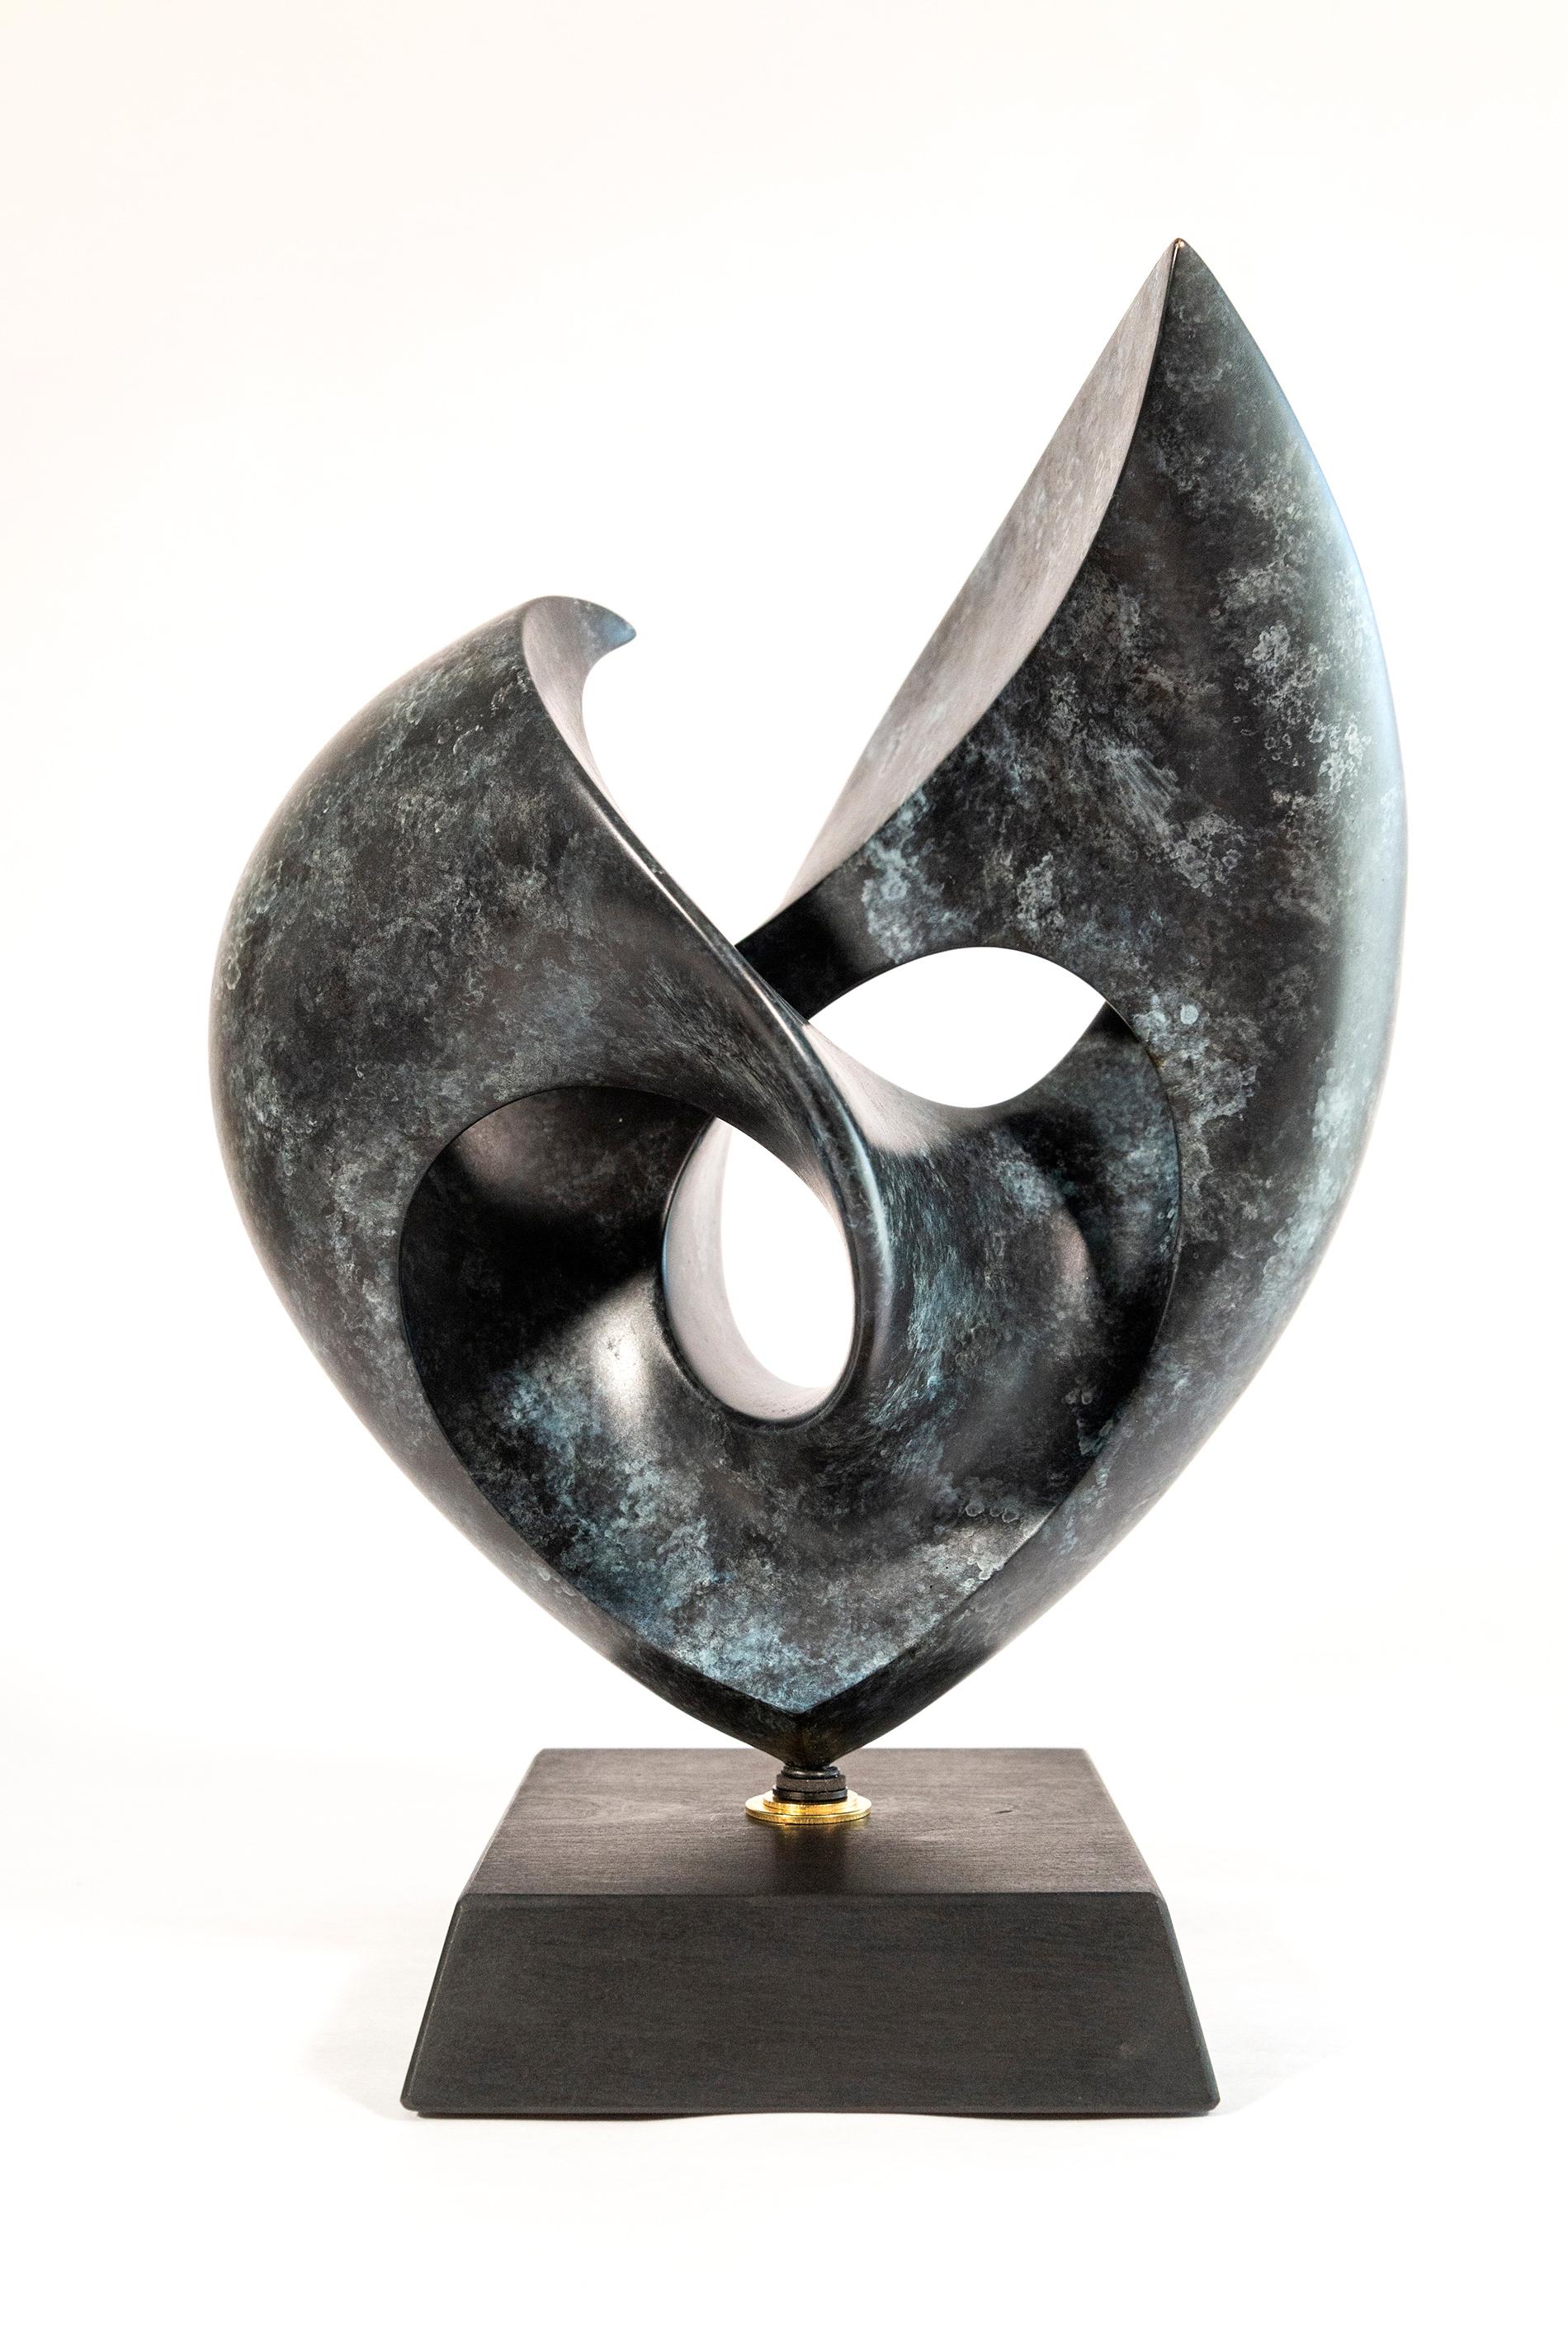 David Chamberlain Abstract Sculpture - Rhapsody Ed. 1/15 - smooth, polished, abstract, bronze and mahogany sculpture